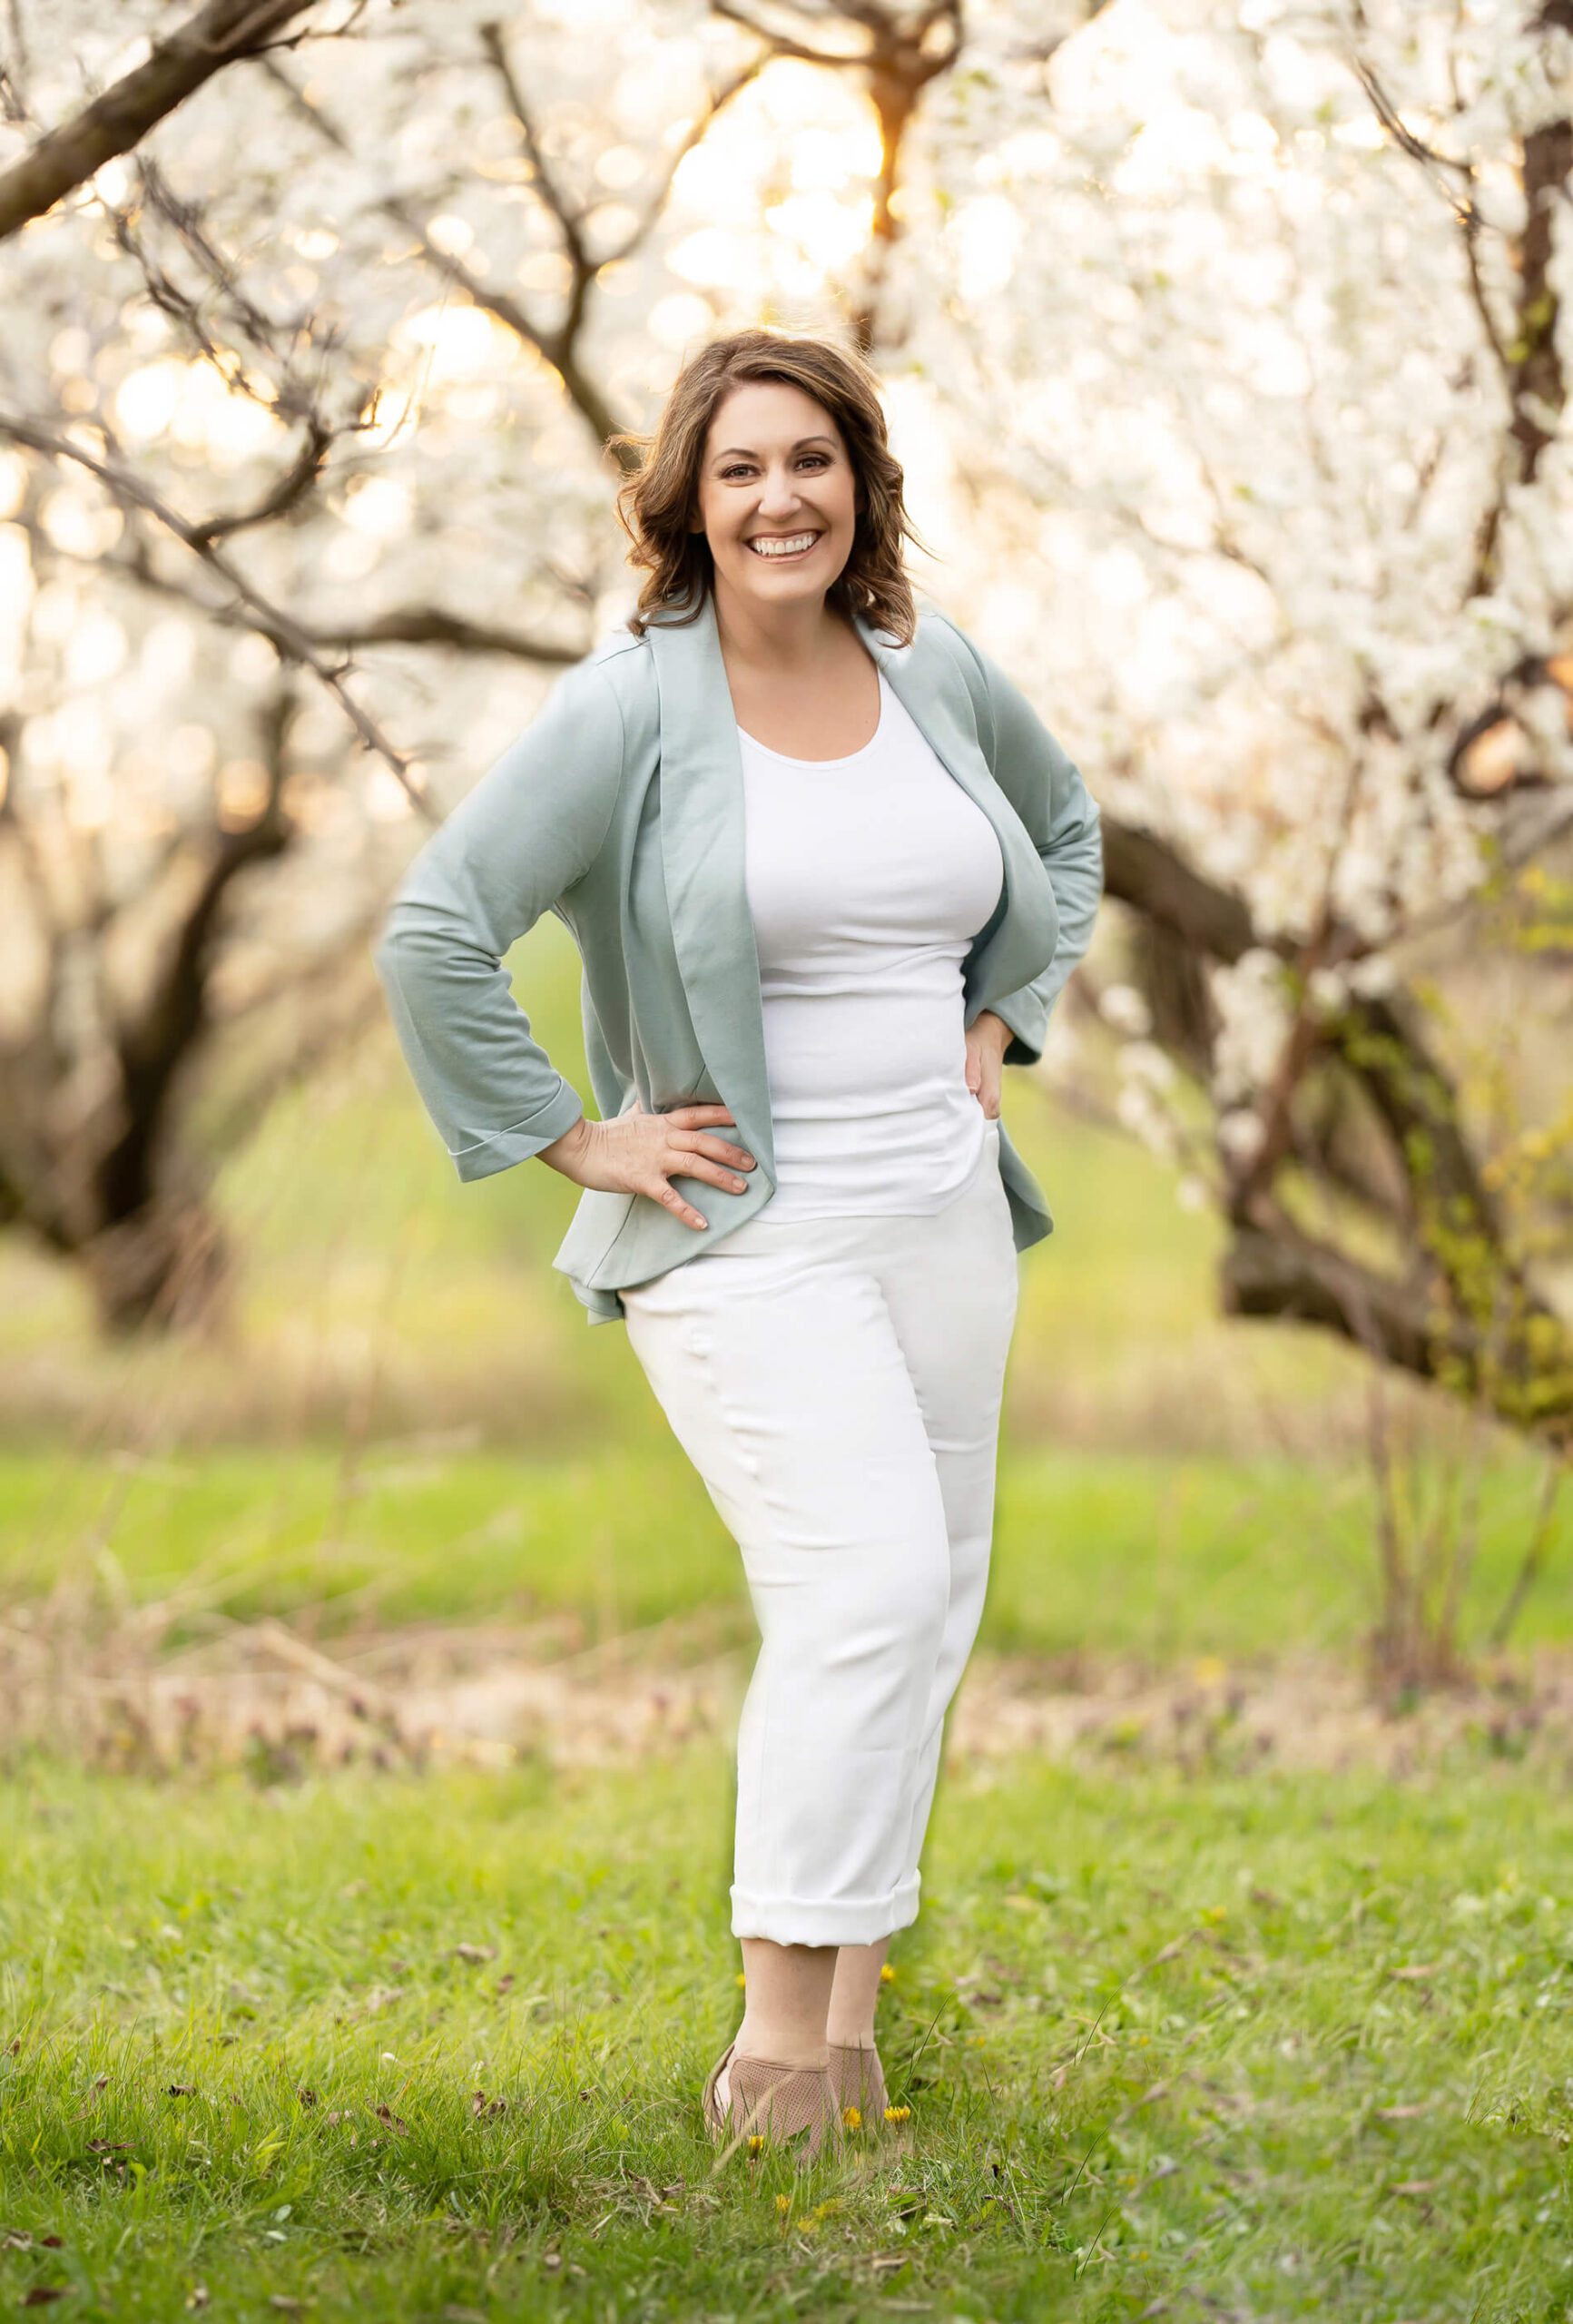 Photo of Amanda Gibson of Gibson Photography Toronto Newborn Photographer in the Cherry Blossoms wearing white pants and a blue top smiling with her hands on her hips.